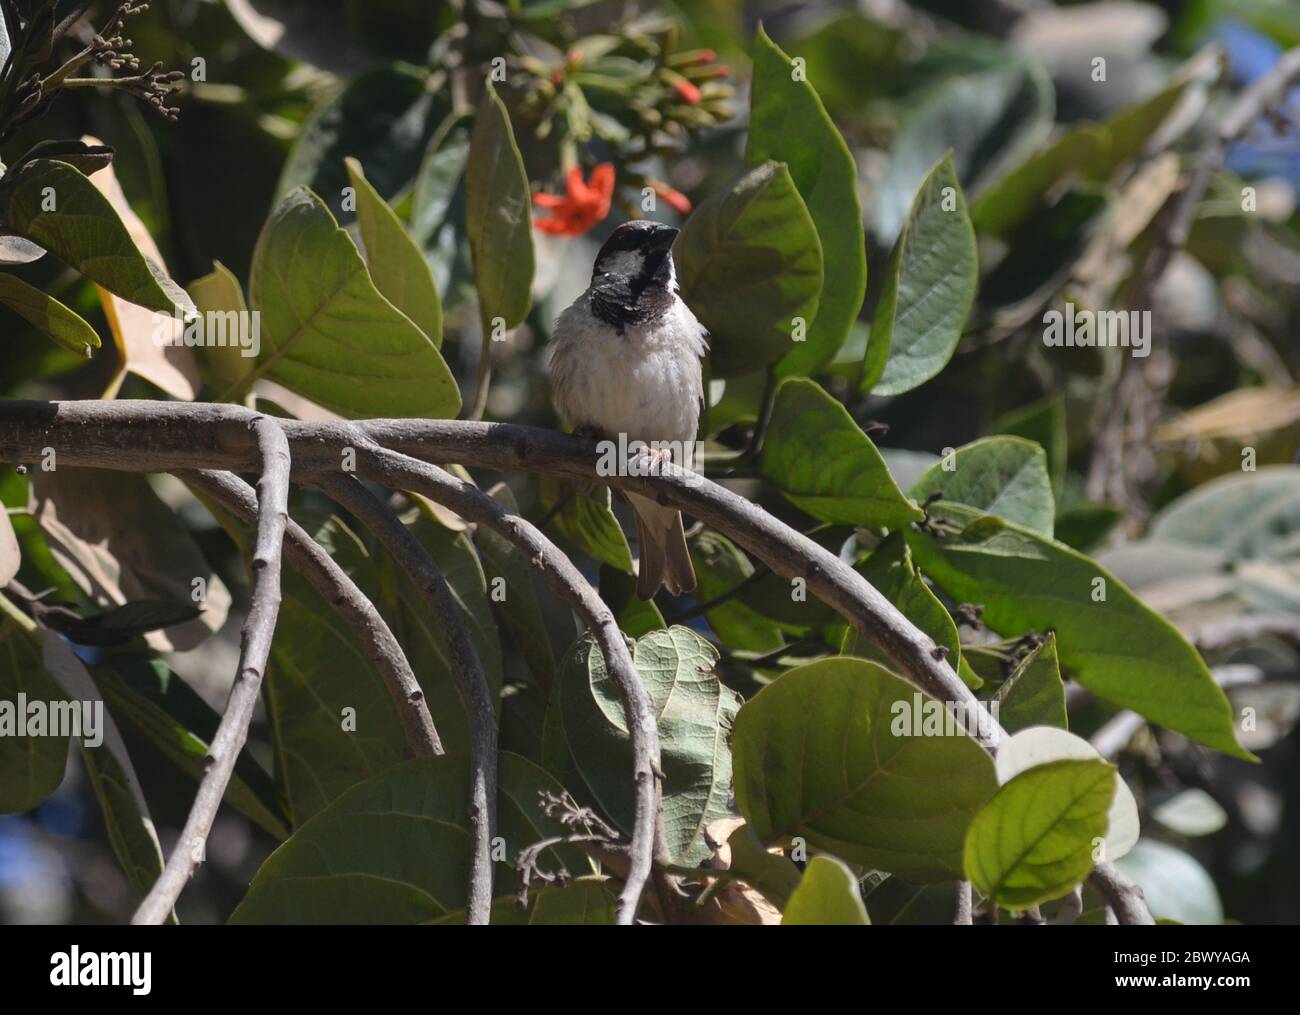 Male house sparrow (Passer domesticus) perched on a tree branch in a urban garden in Dakar, Senegal Stock Photo